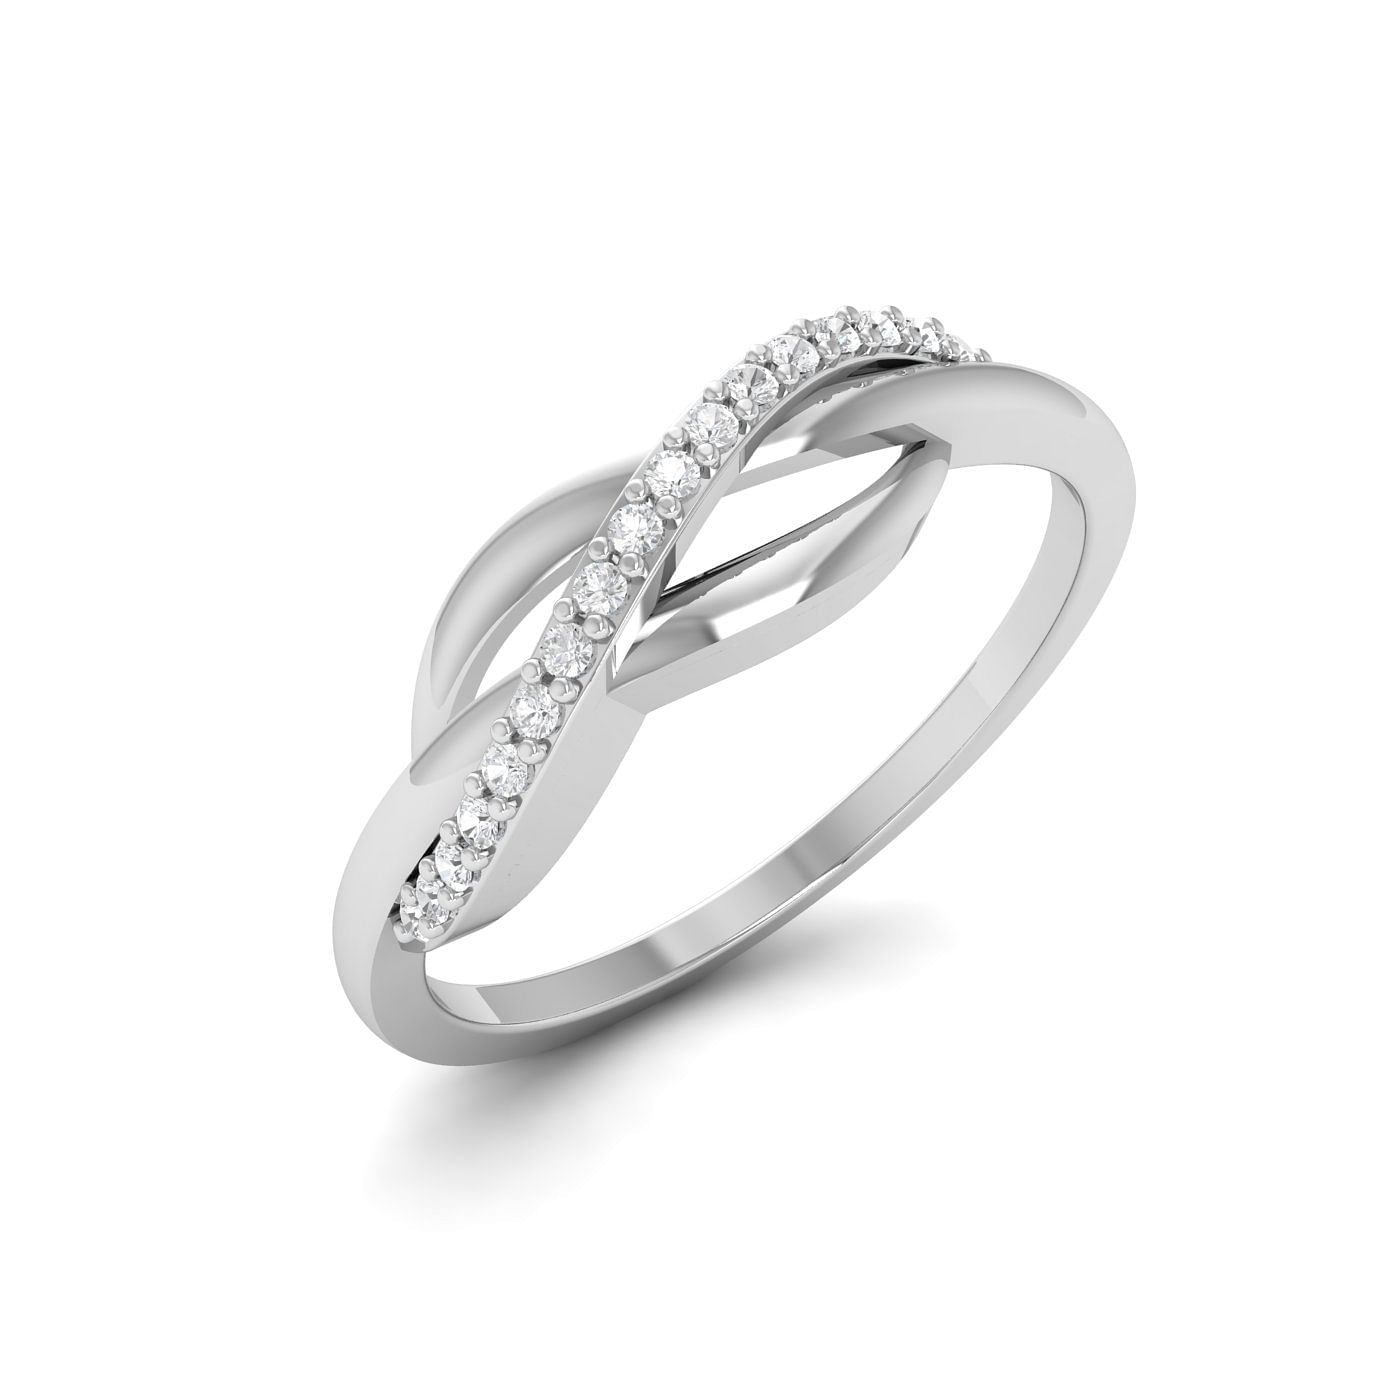 Wavy Diamond Delicate Ring White Gold For Daily Wear Or Gift